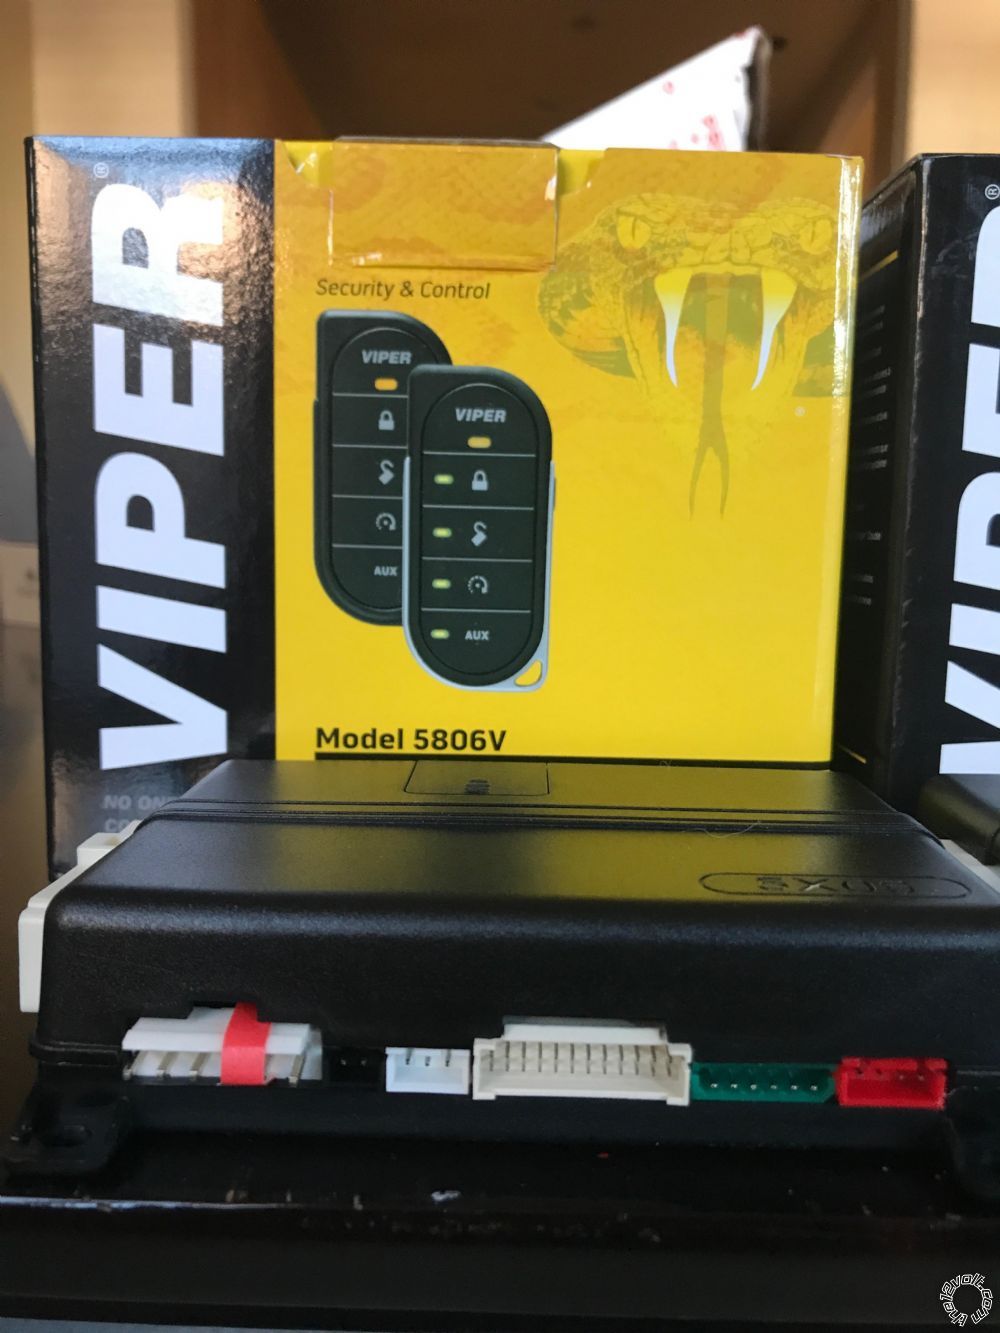 Can Anyone Explain the Viper 5806v Shut Off Switch? - Last Post -- posted image.